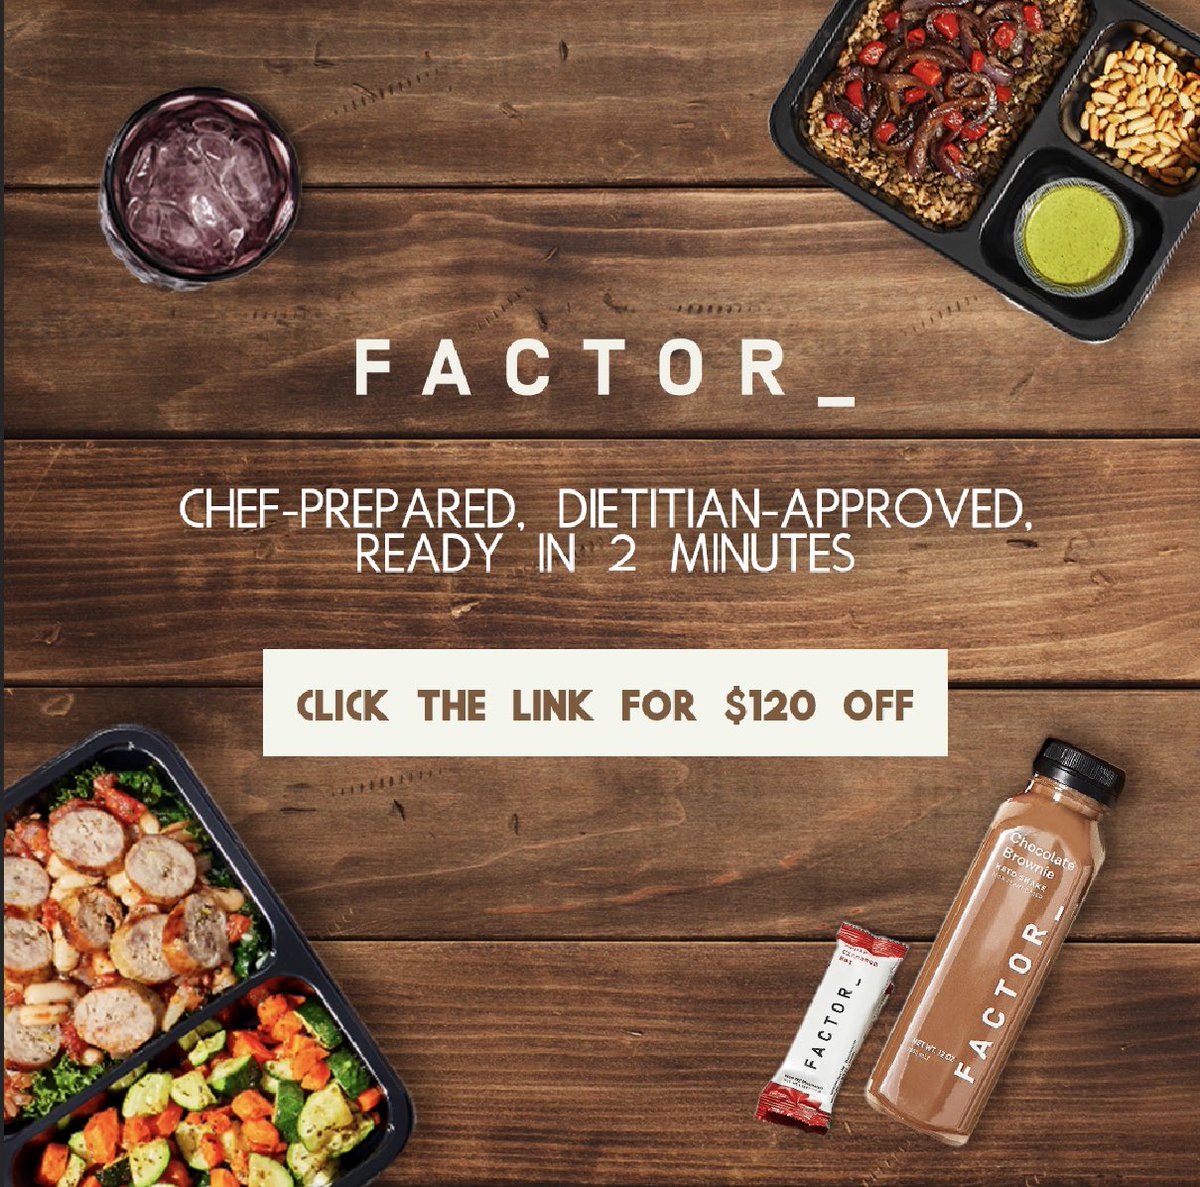 Happy to announce my partnership with @FactorMeals Use code POGWATTSON60 for 60% off your first box at strms.net/factor75_hiswa… #FactorPartner